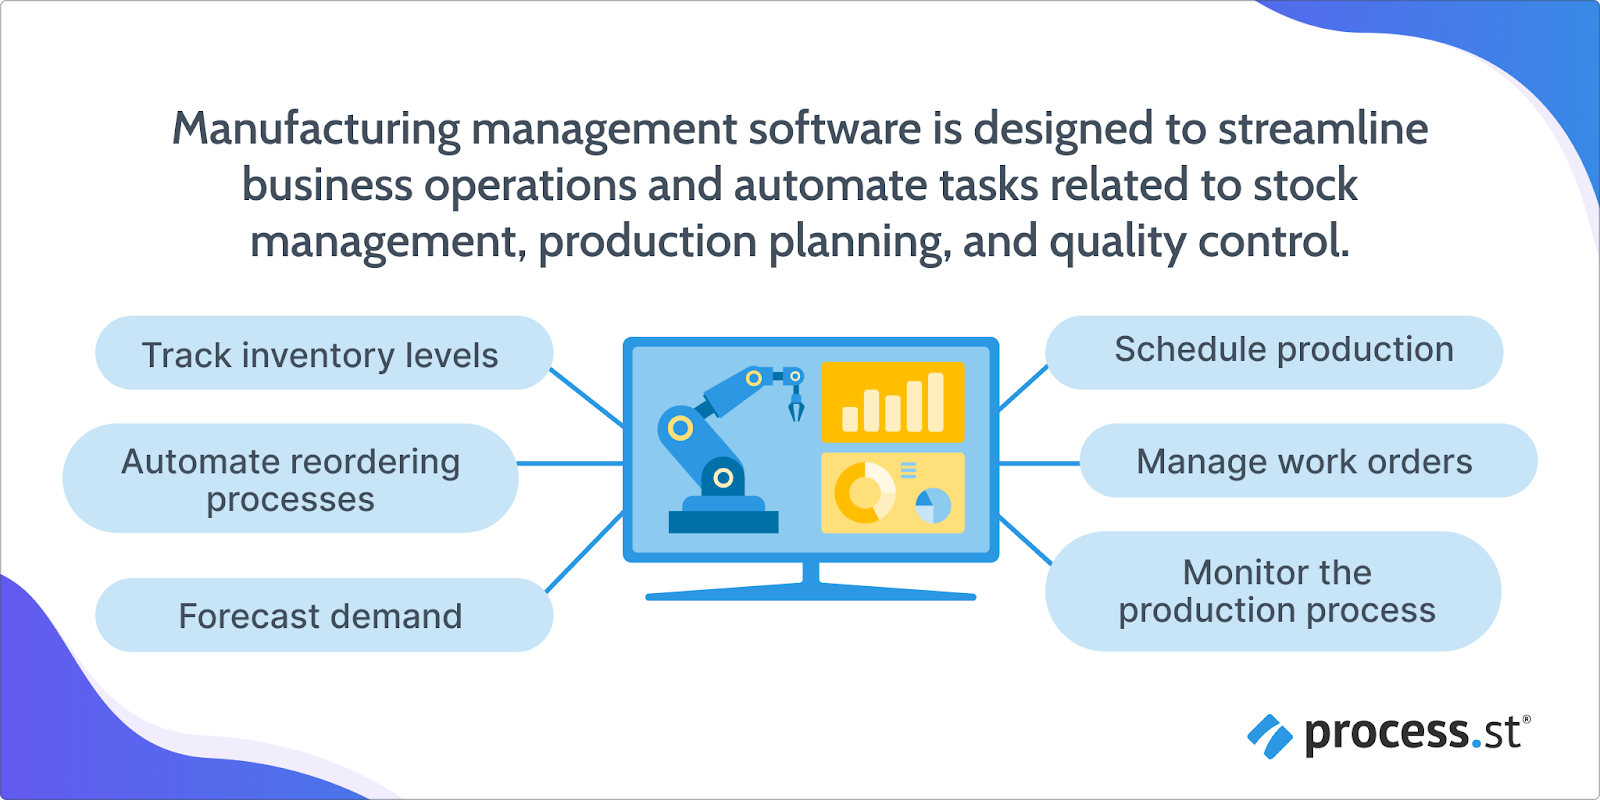 image showing the elements of manufacturing management software